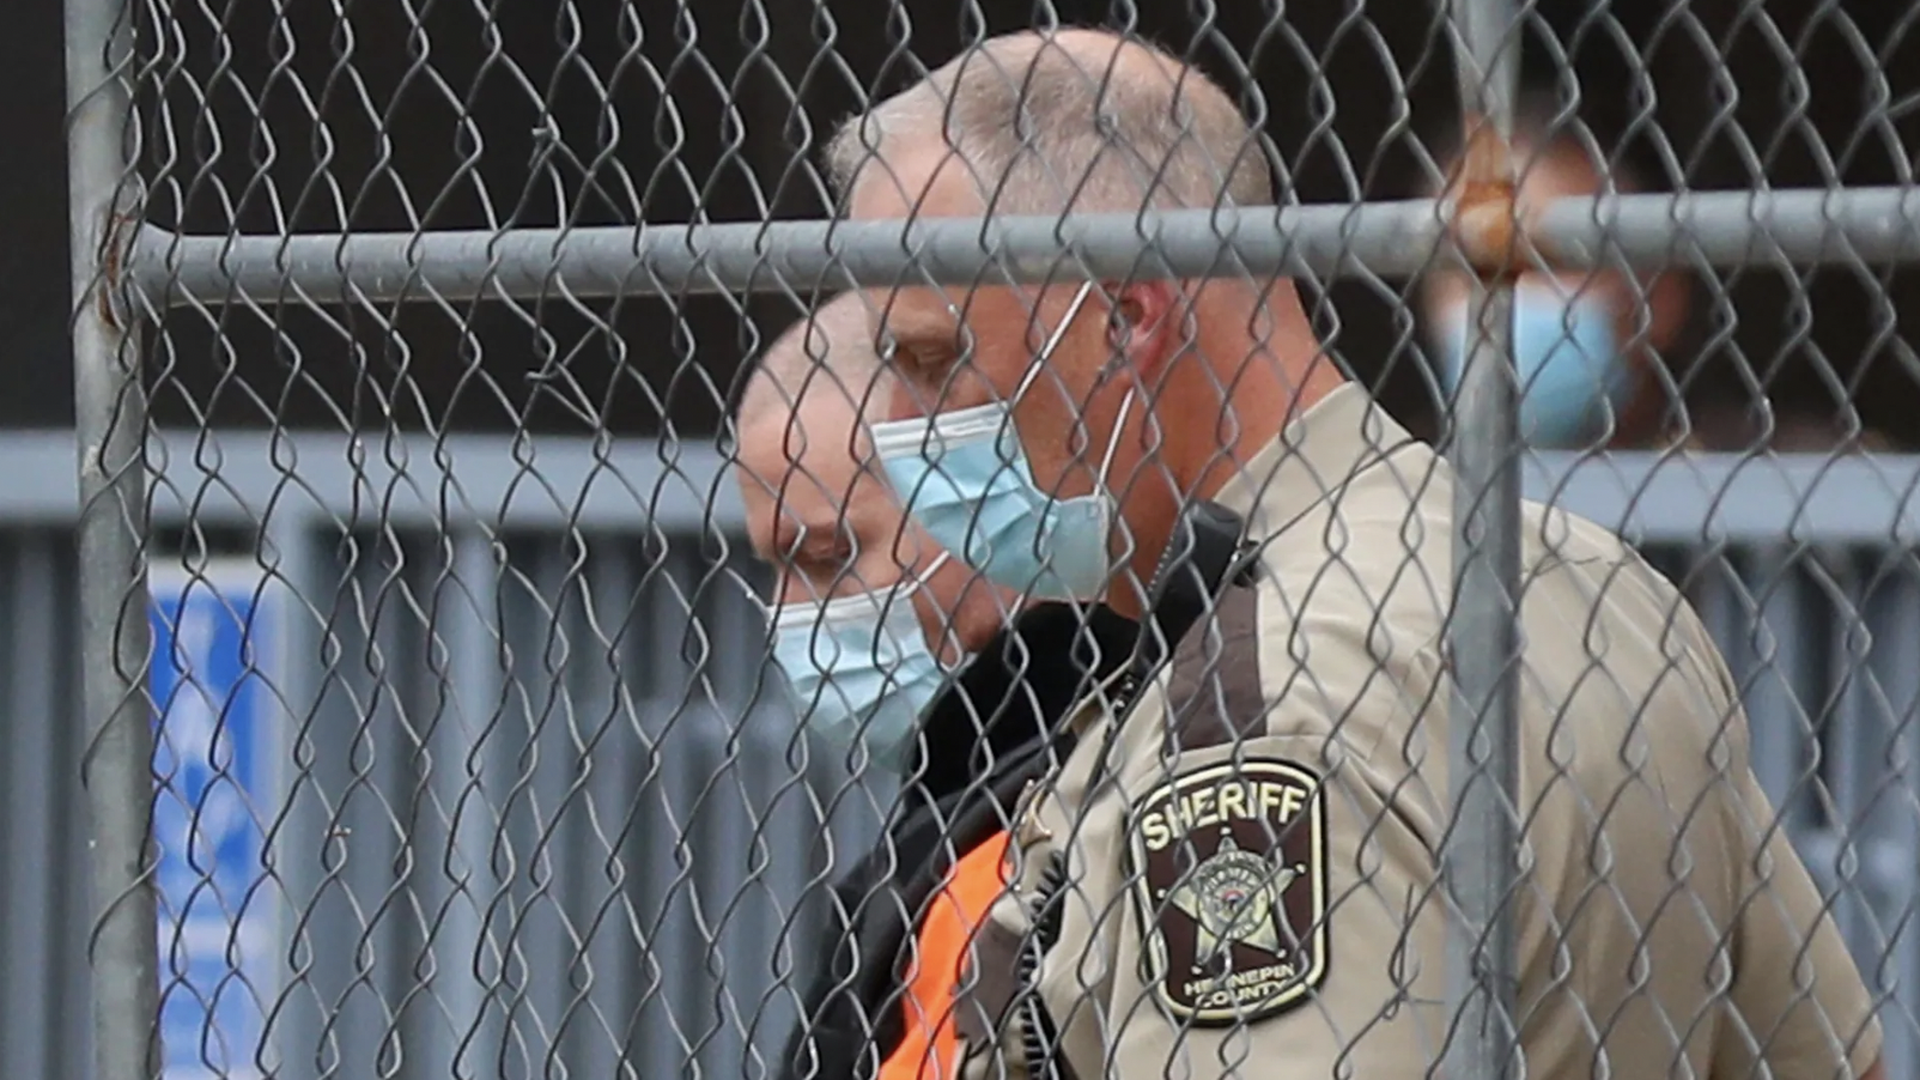 Derek chauvin in a mask being escorted by a sheriff's officer behind a fence